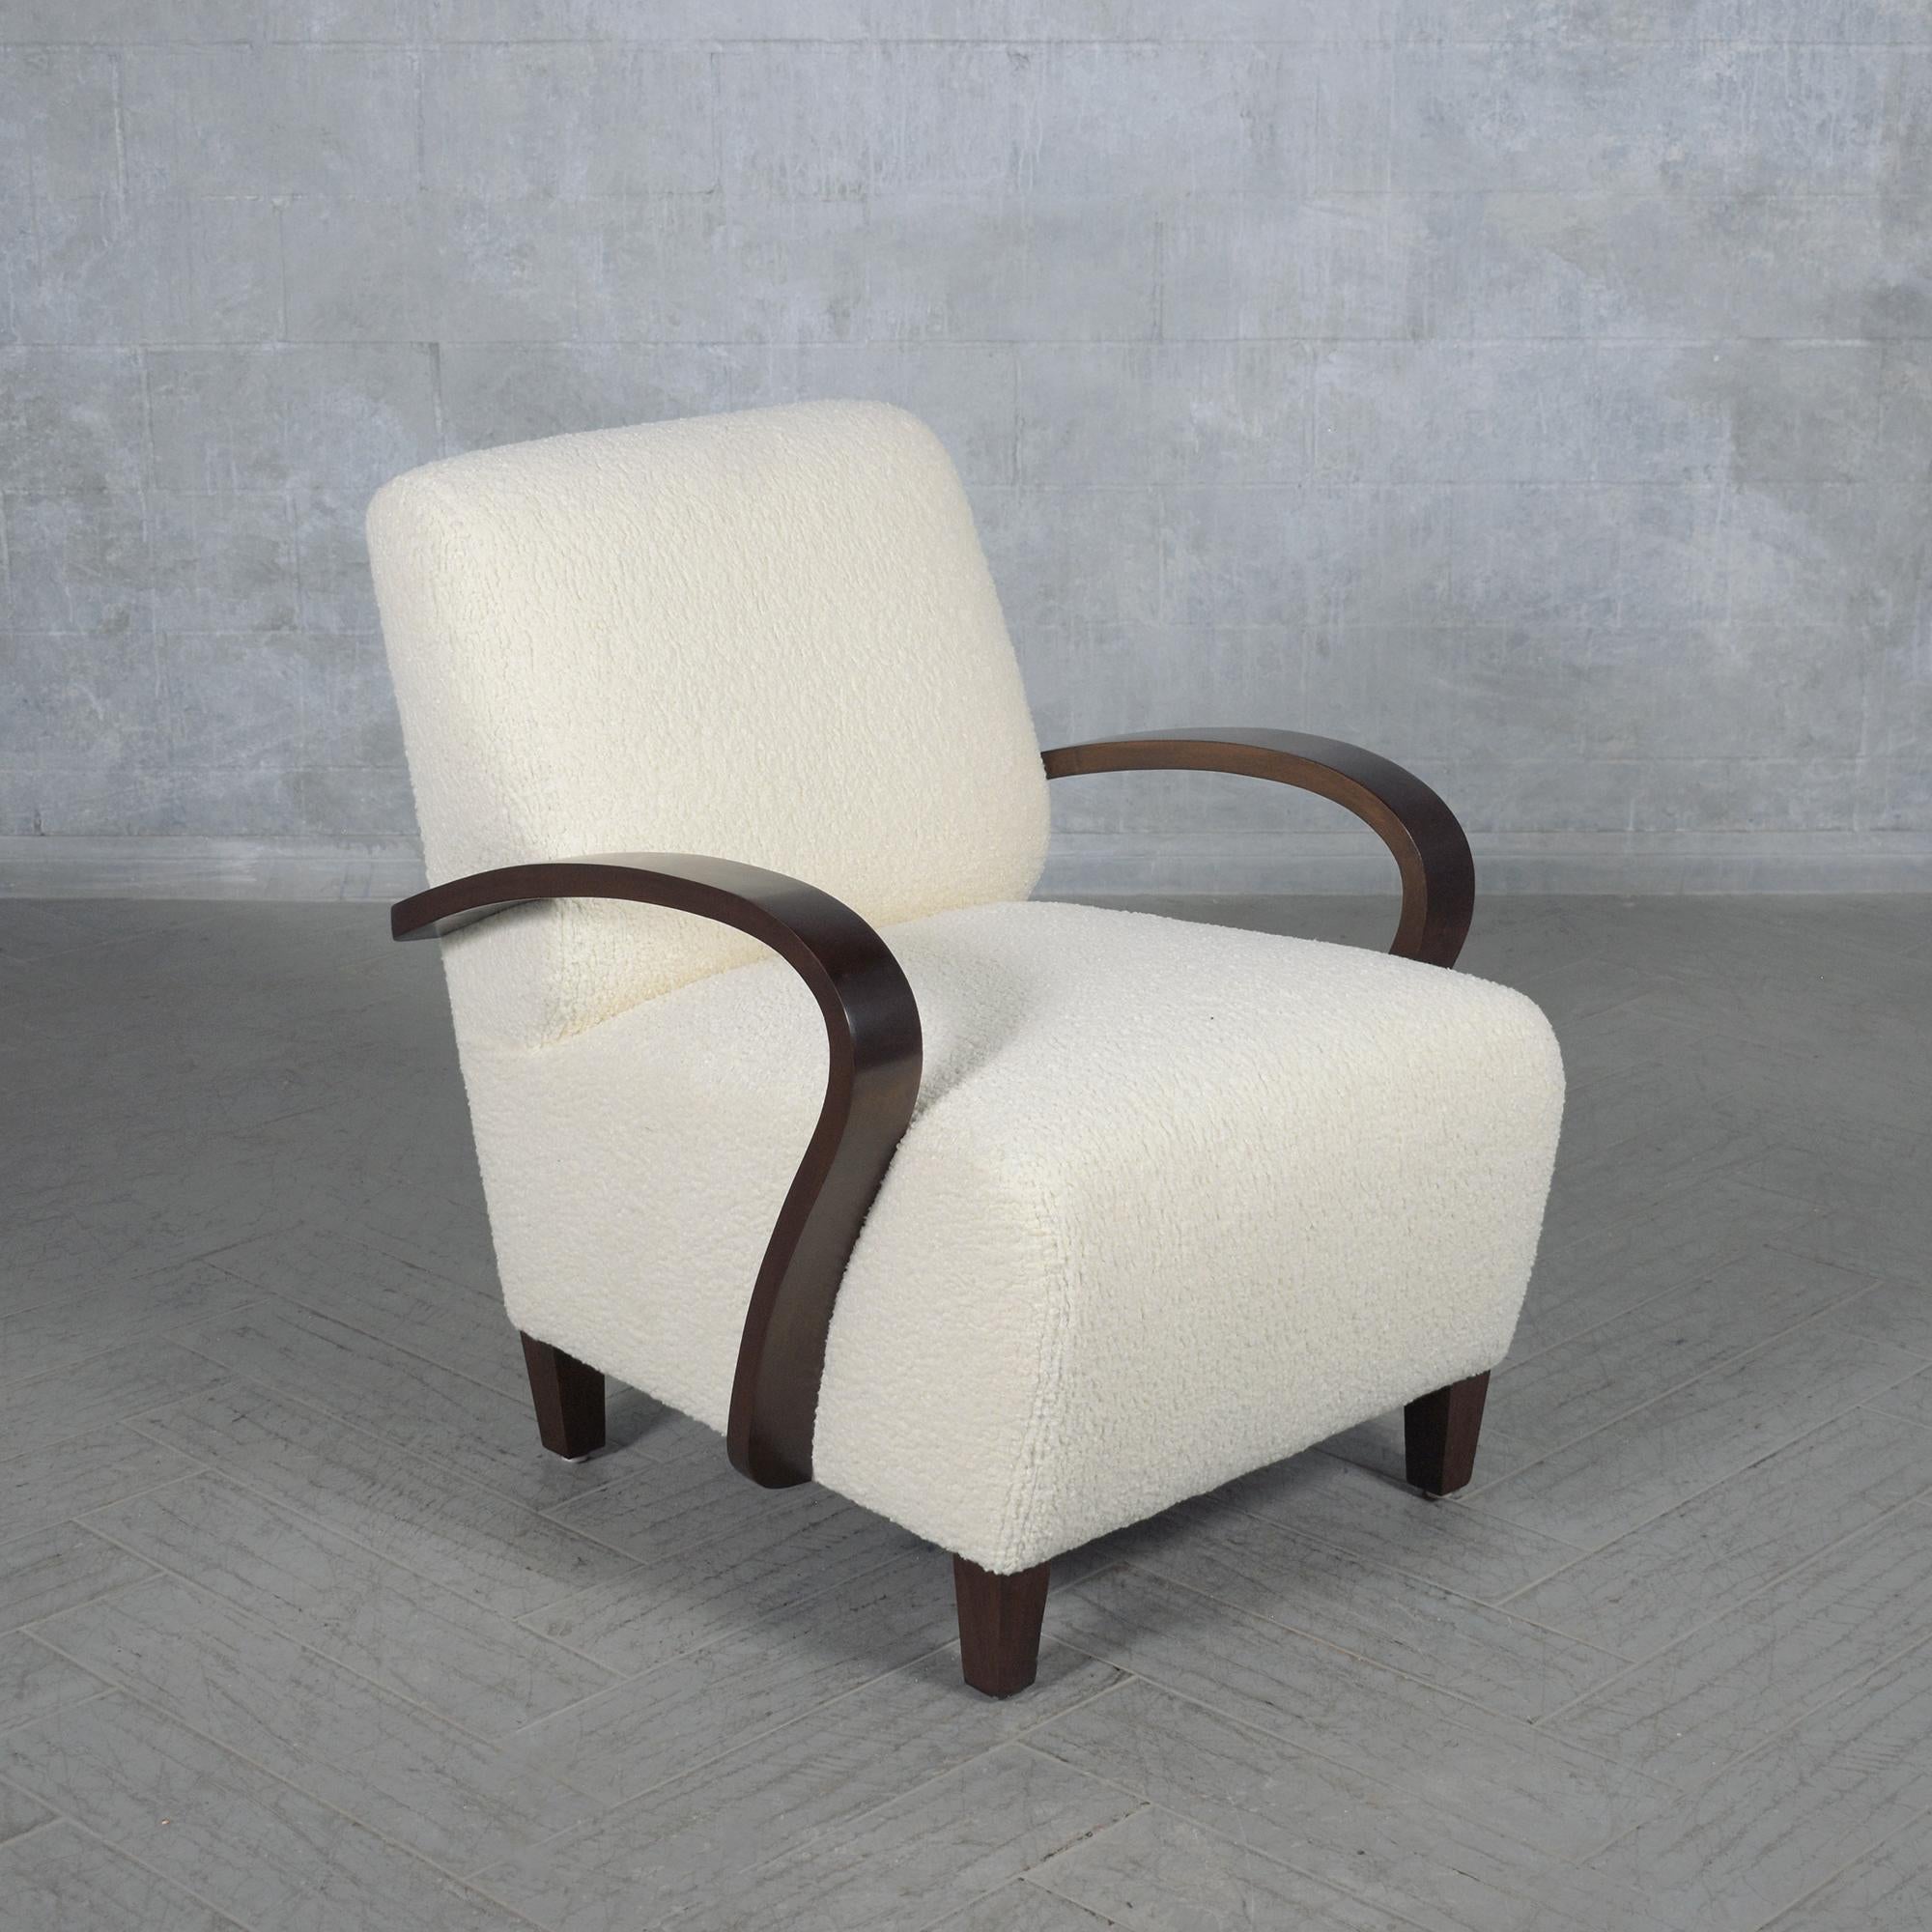 Mid-20th Century Restored Mid-Century Modern Lounge Chairs: Timeless Style Meets Modern Comfort